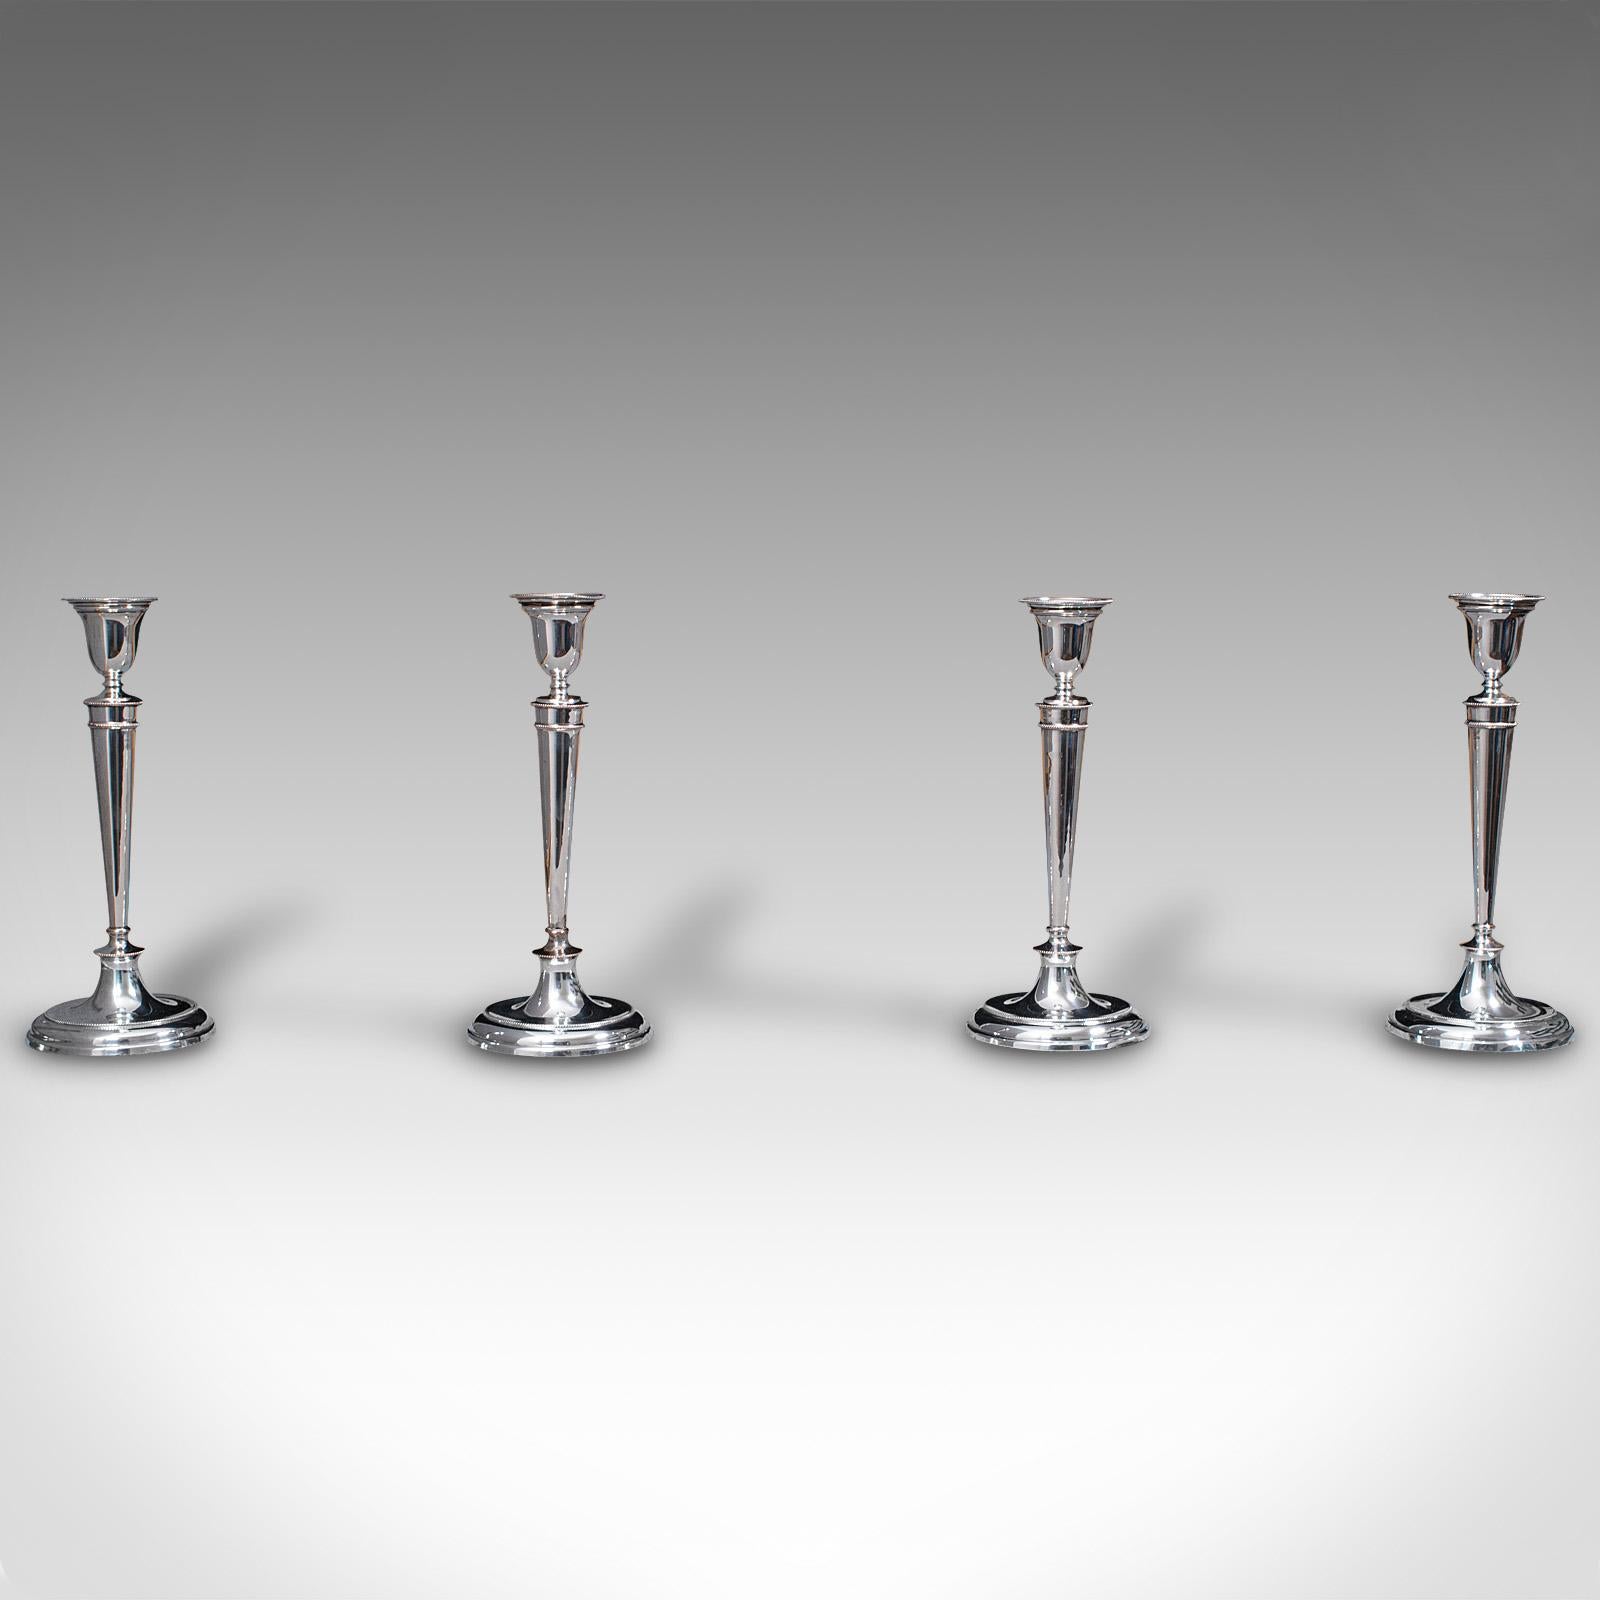 This is a set of 4 antique candlesticks. An English, silver plate candle sconce, dating to the late Victorian period, circa 1900.

Elegant candlesticks with bright appearance and fine detail
Displaying a desirable aged patina - some small marks